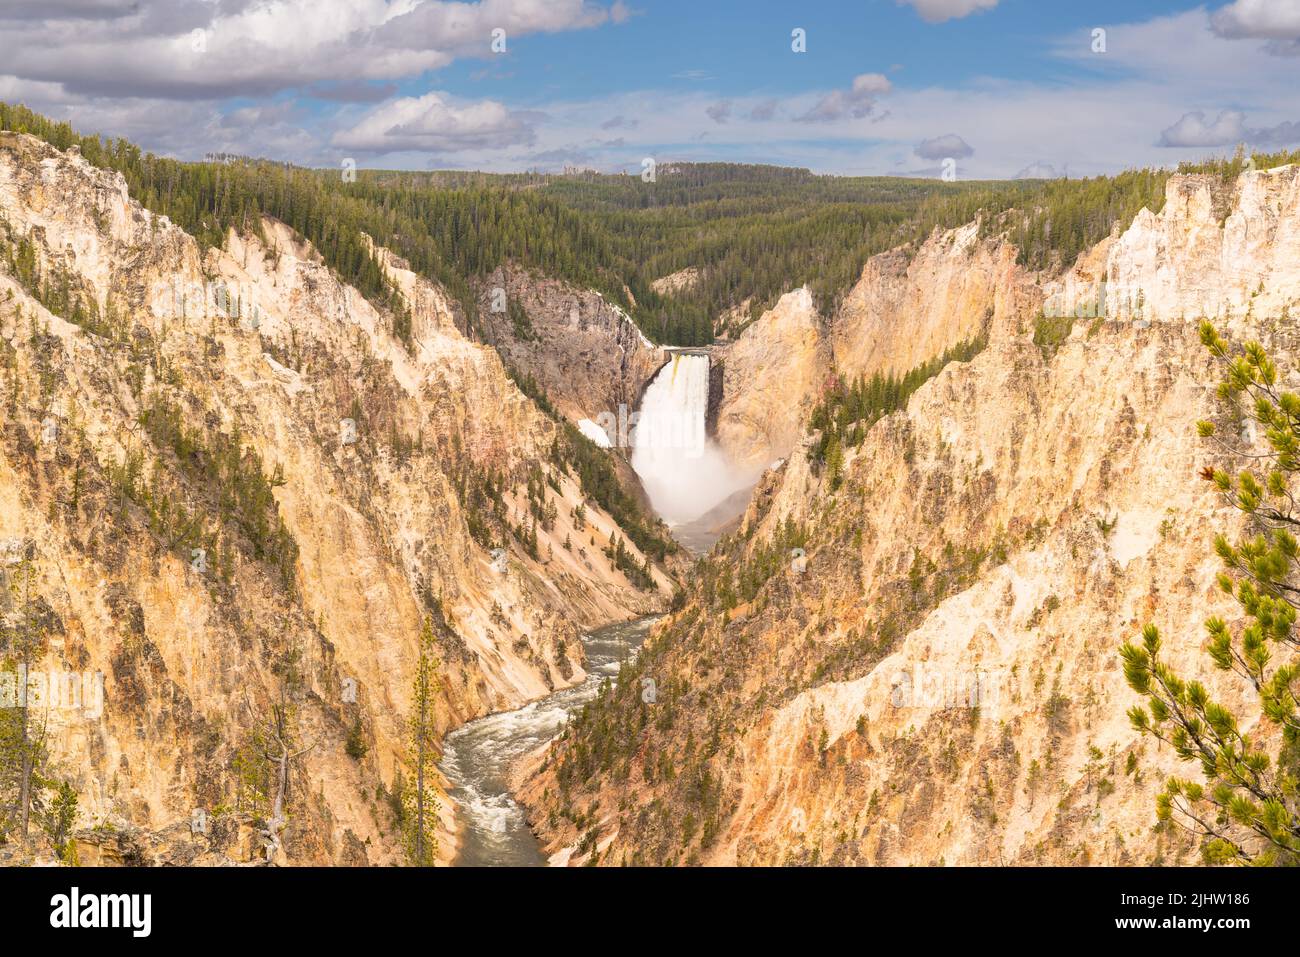 Lower Falls of the Yellowstone River in Yellowstone National Park, Wyoming Stock Photo